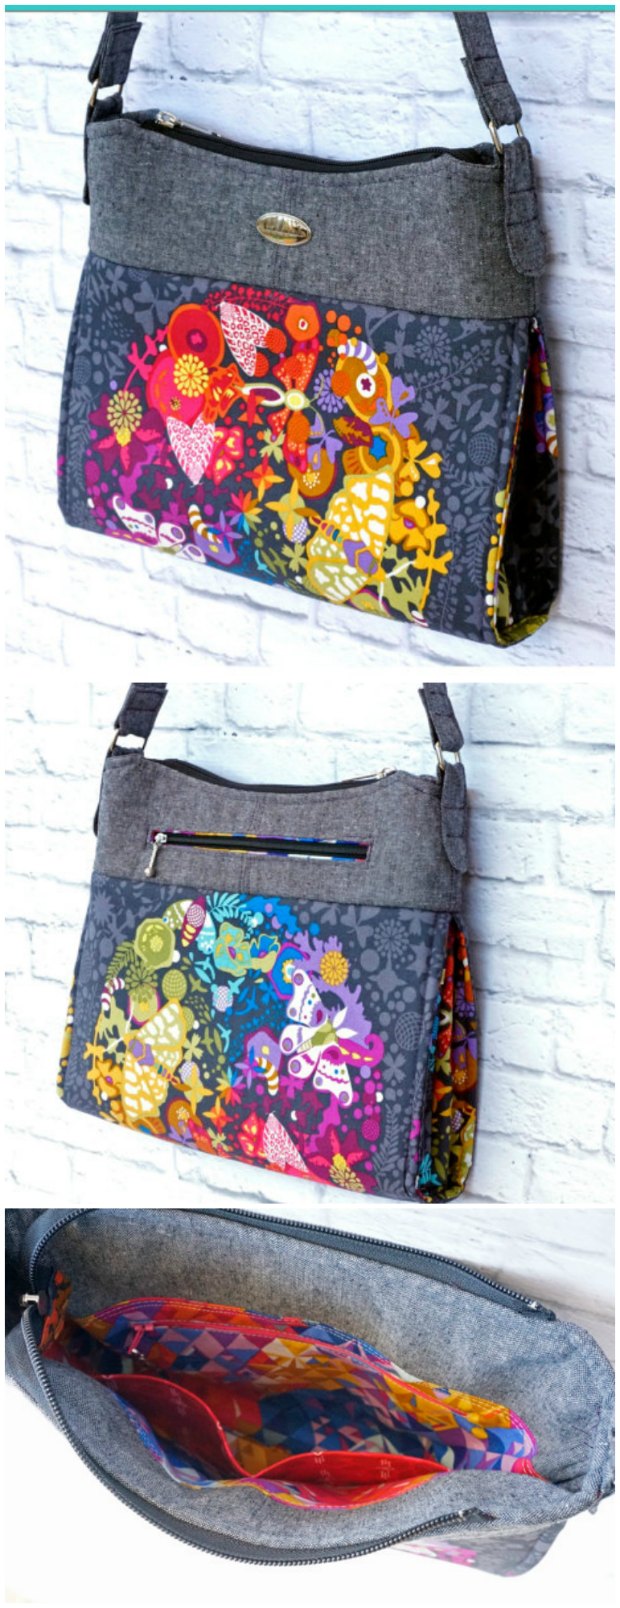 Gabby purse sewing pattern.  I love the examples and slideshow shown here - so very inspiring for ideas.  Works in leather, faux leather and fabrics of all kinds.